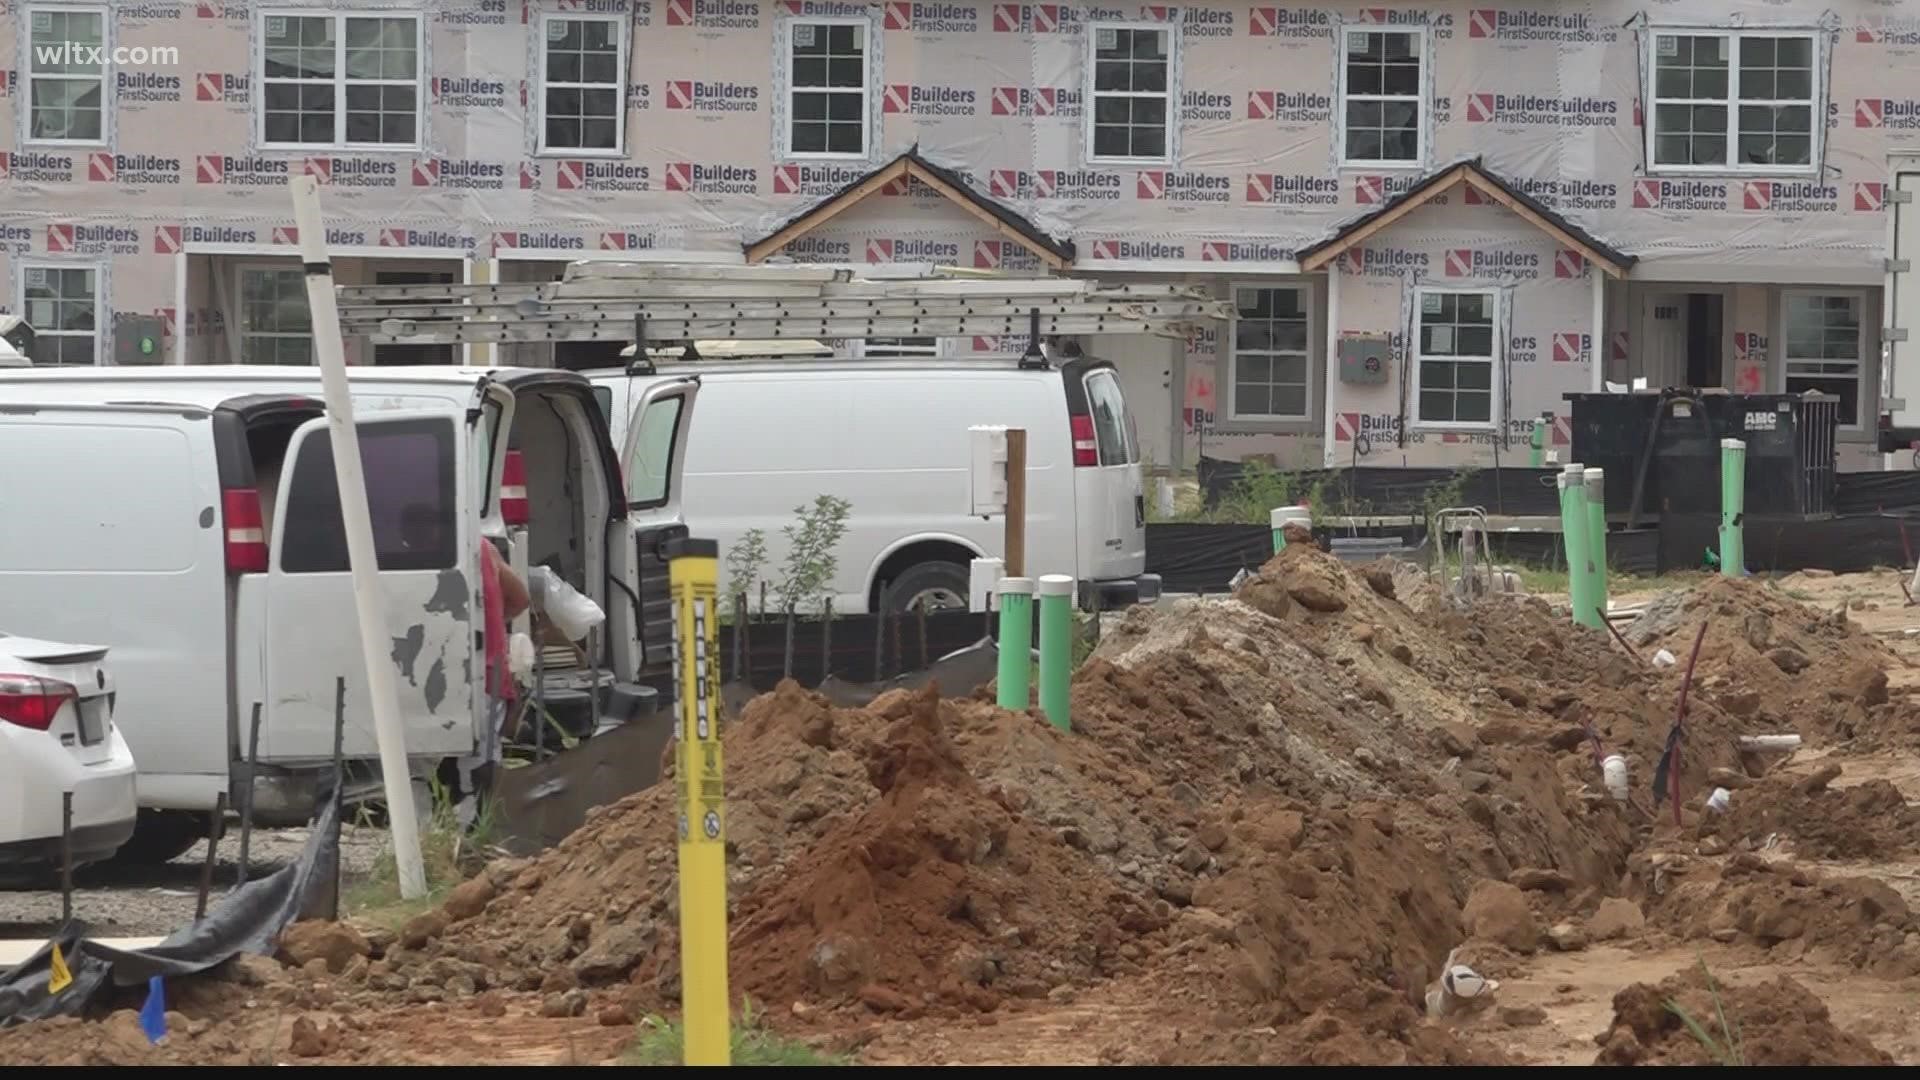 The City of Columbia is looking for contractors to participate in a new housing rehabilitation program.